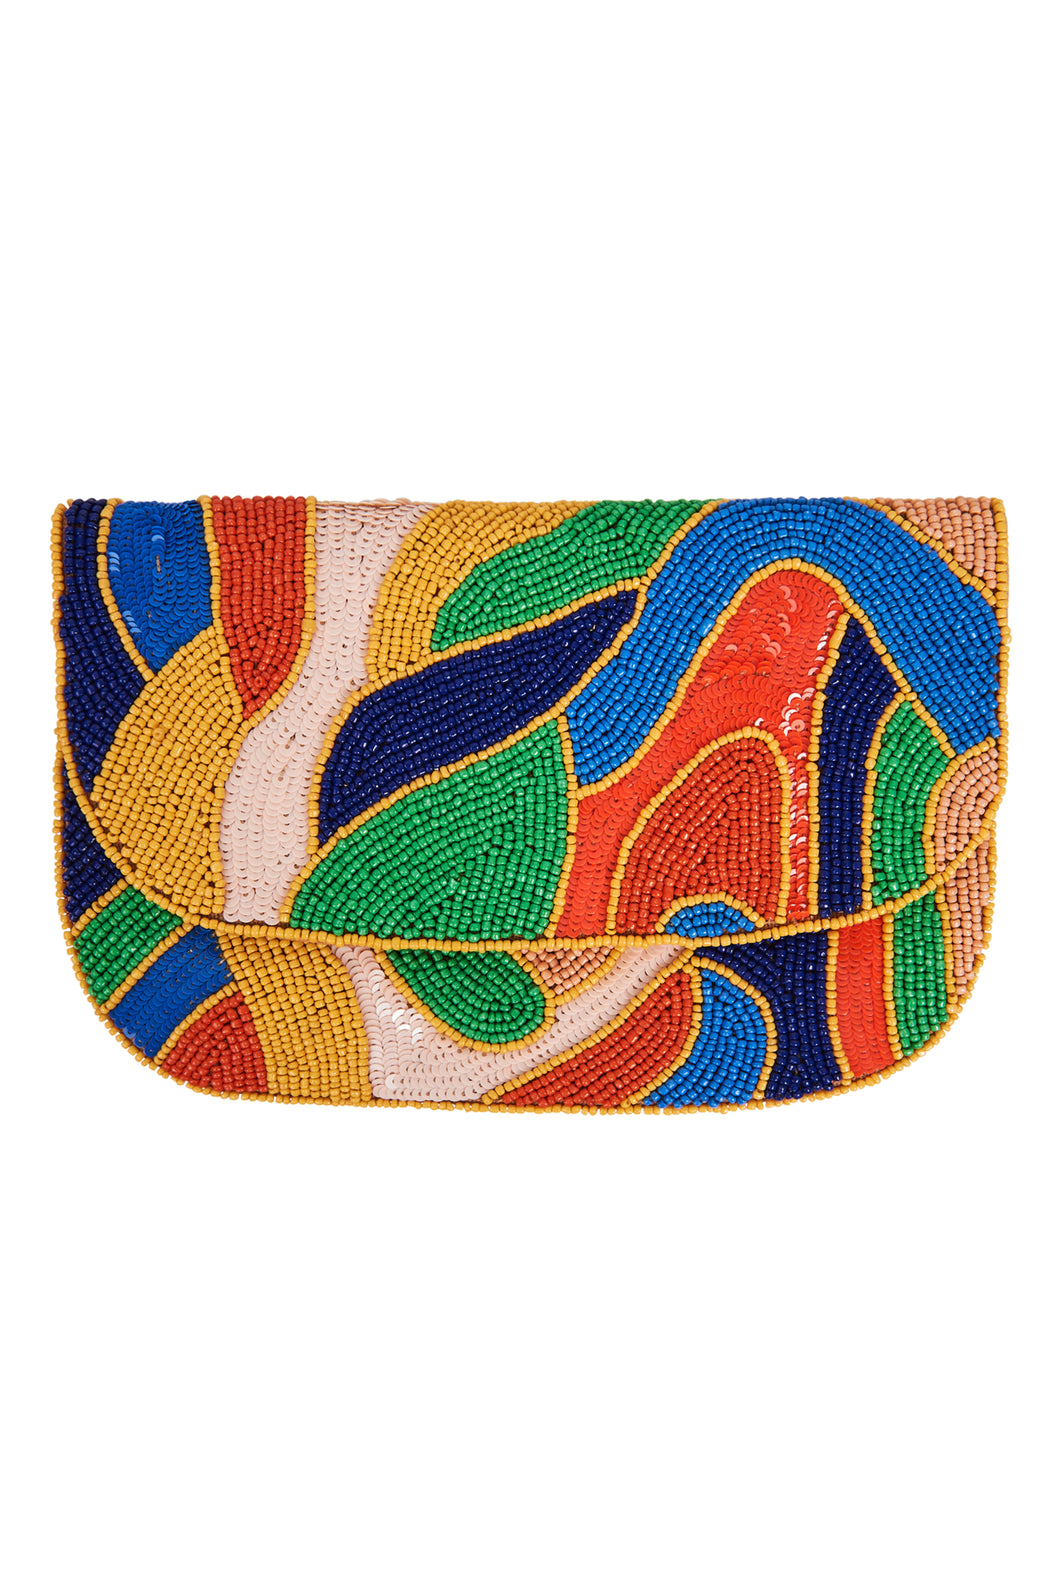 Eb&Ive - Luxe Clutch in Multicolours